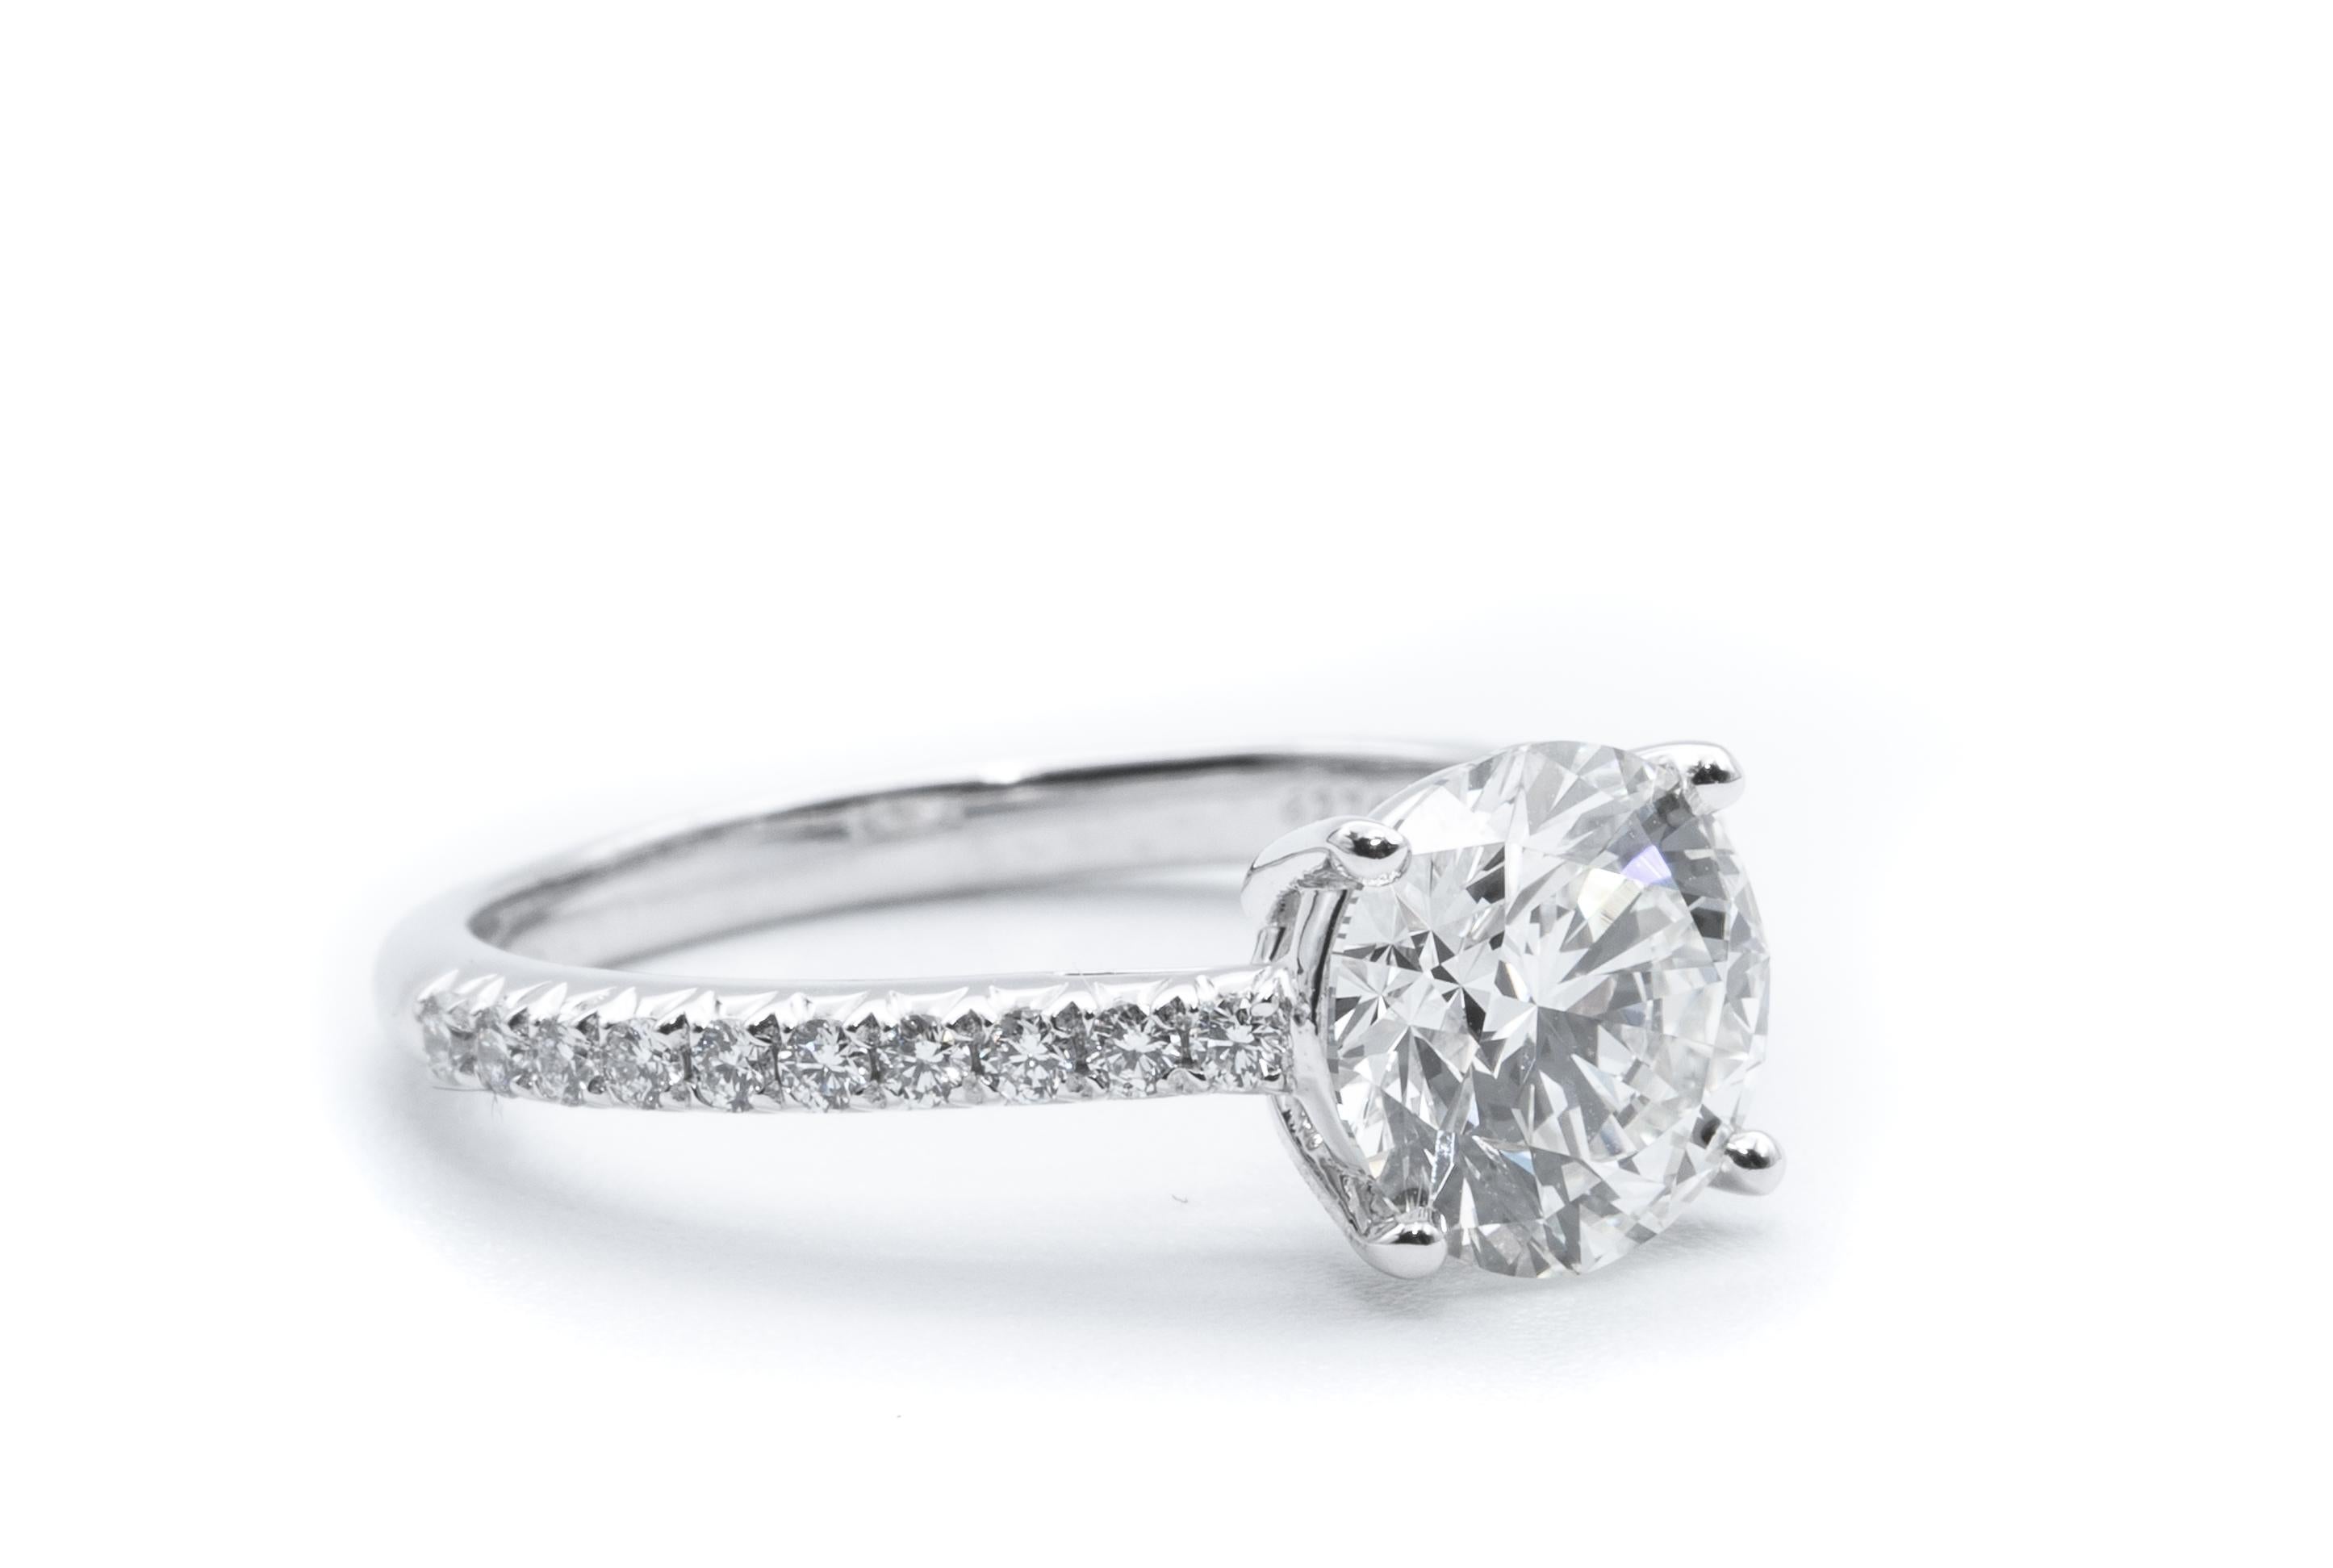 Tiffany & Co Diamond Engagement Solitaire signed by Tiffany & Co. featuring a 1.56 carat Center, graded I Color , and VS2 Clarity.
Highlighted with 20 brilliant cut round diamonds
With original papers.
Diamond Crown inscription :  T&Co